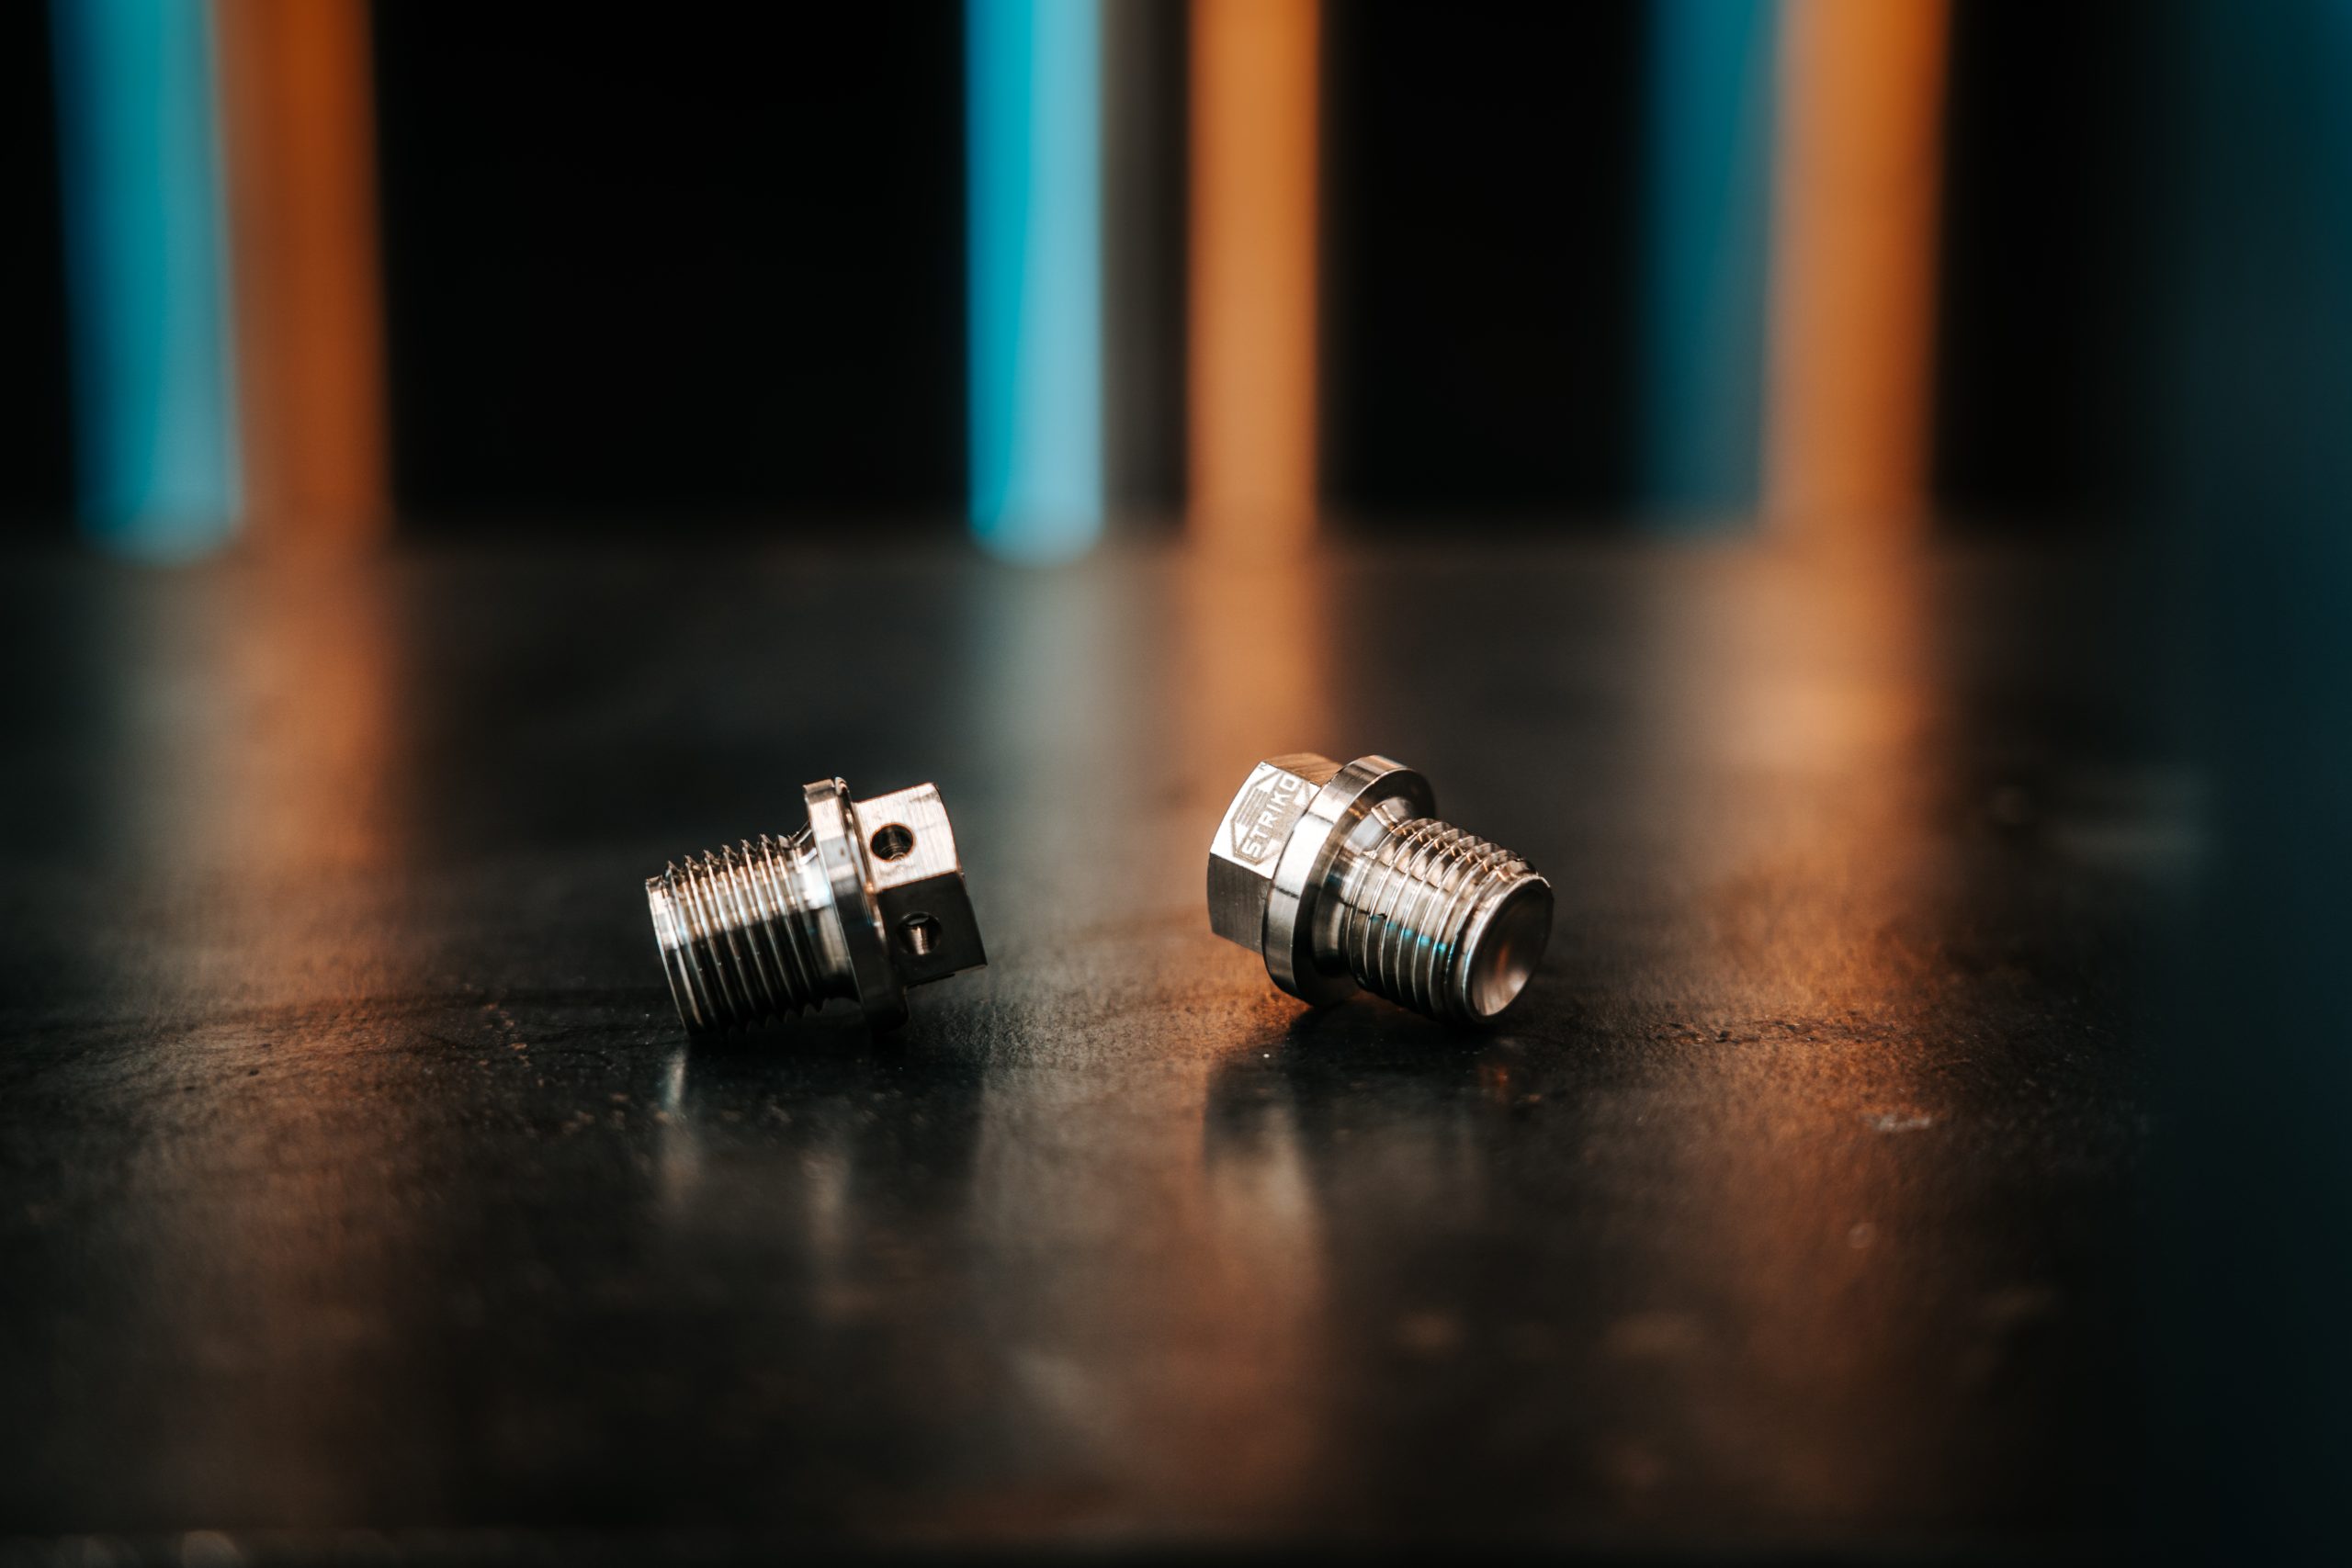 S-BS-1 (left) & S-BS-2 (right) G1/4"